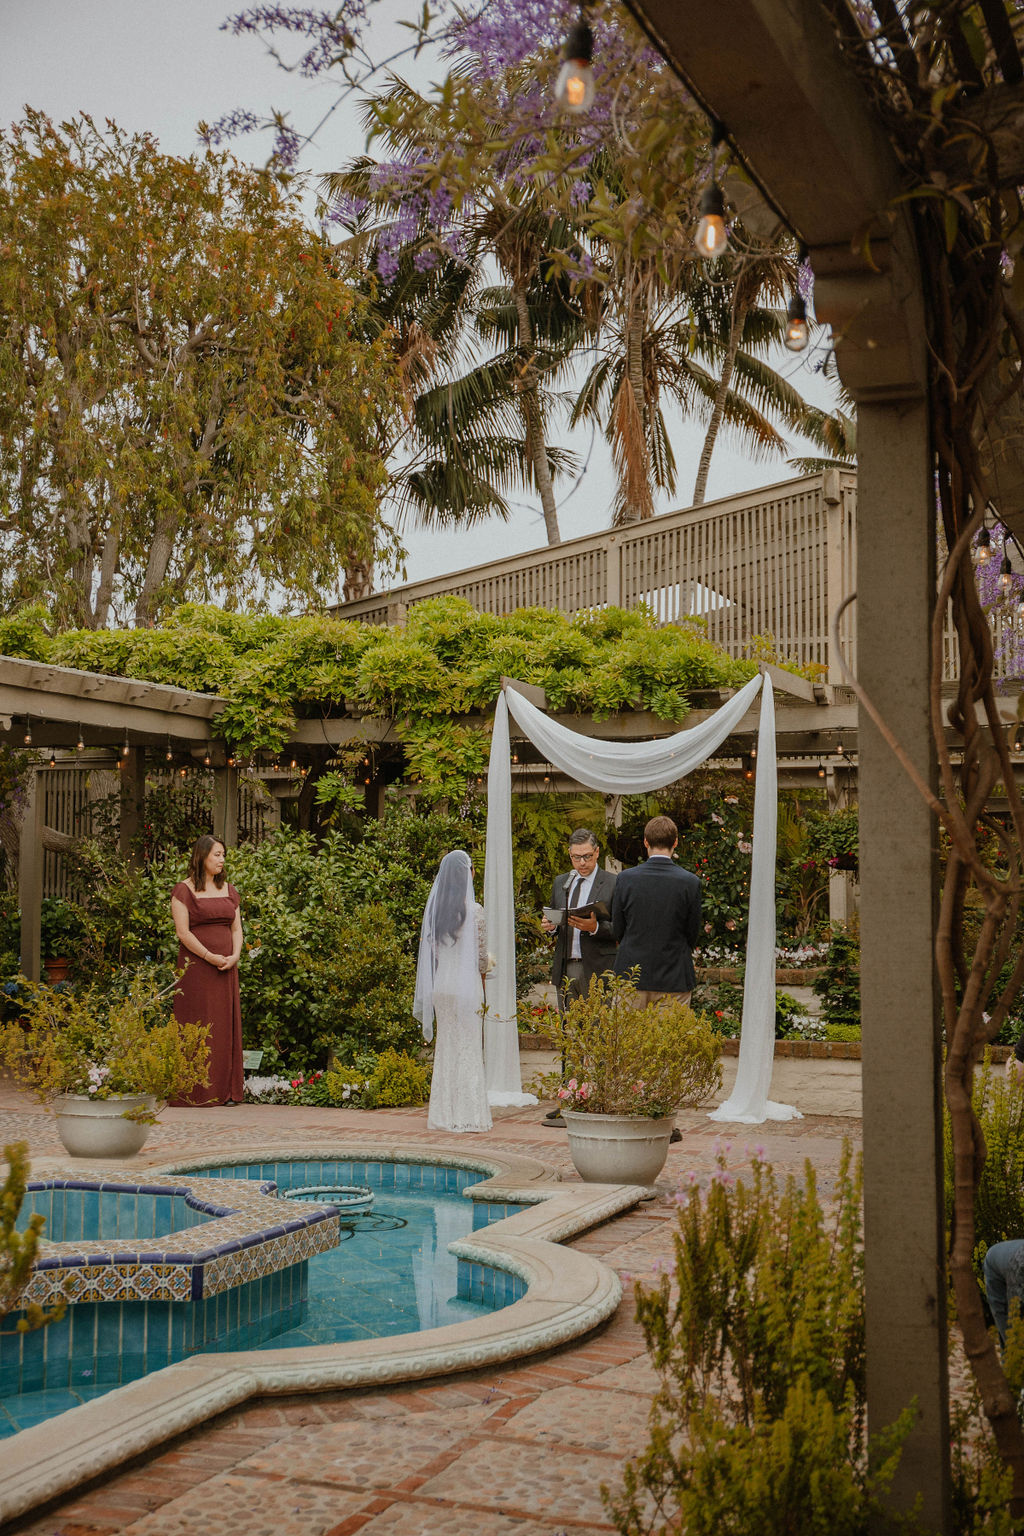 the view of the pool during the ceremony